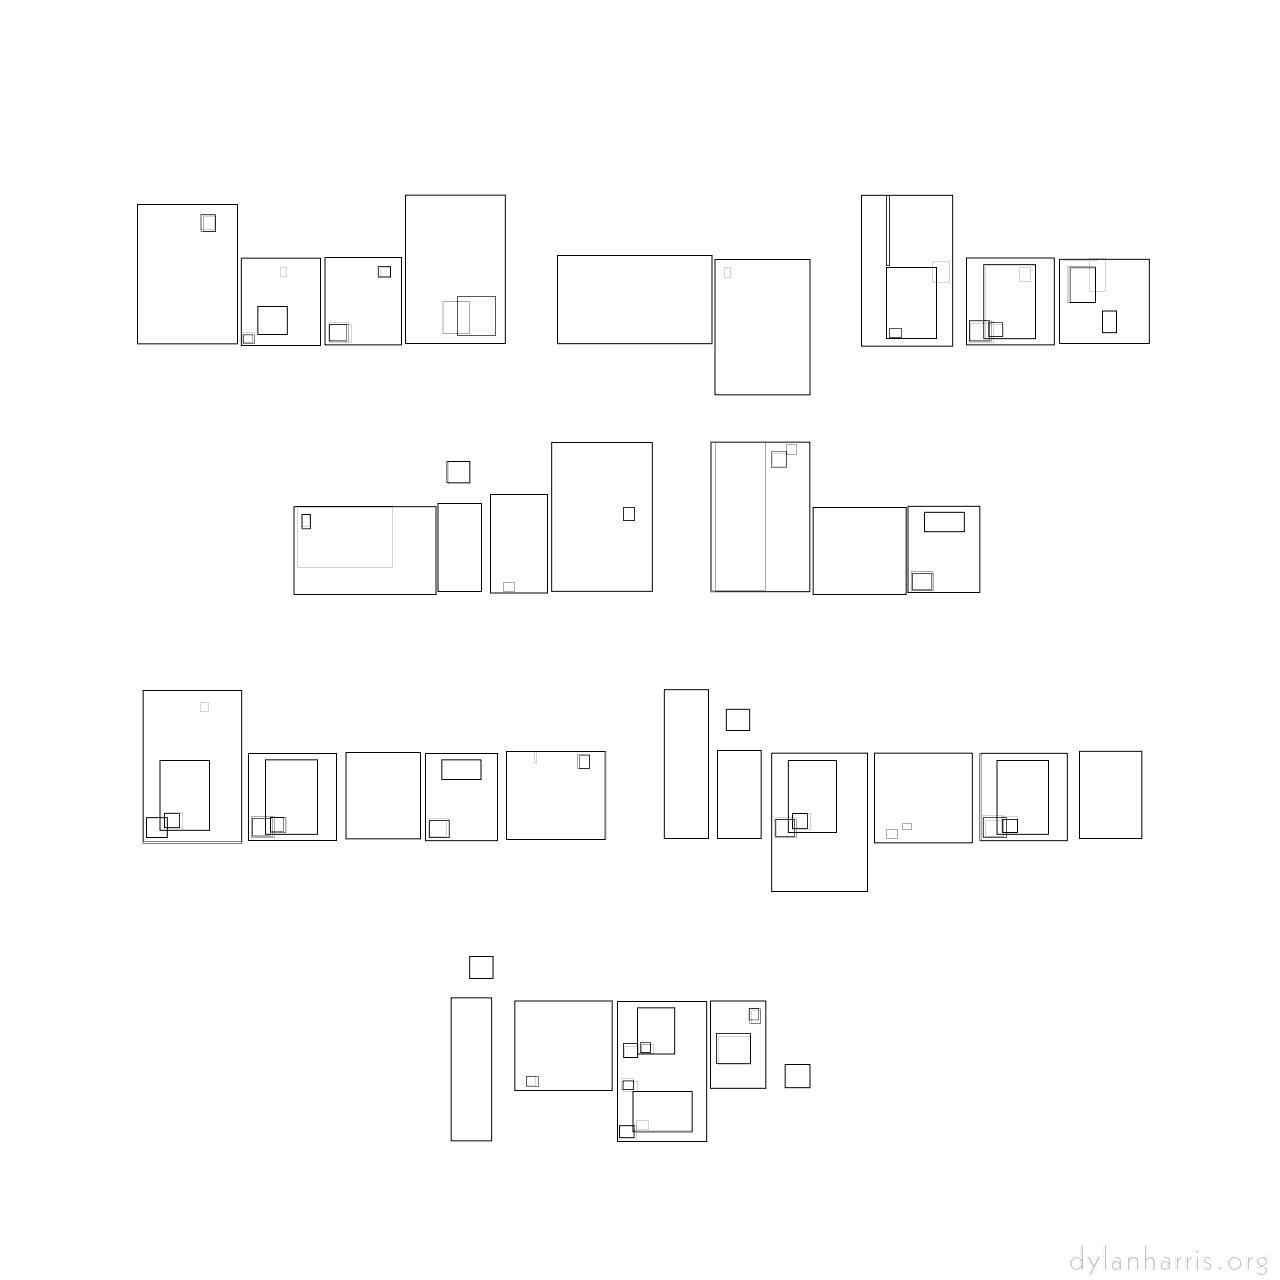 image: image efx - place image in canvas :: rectangular sketch